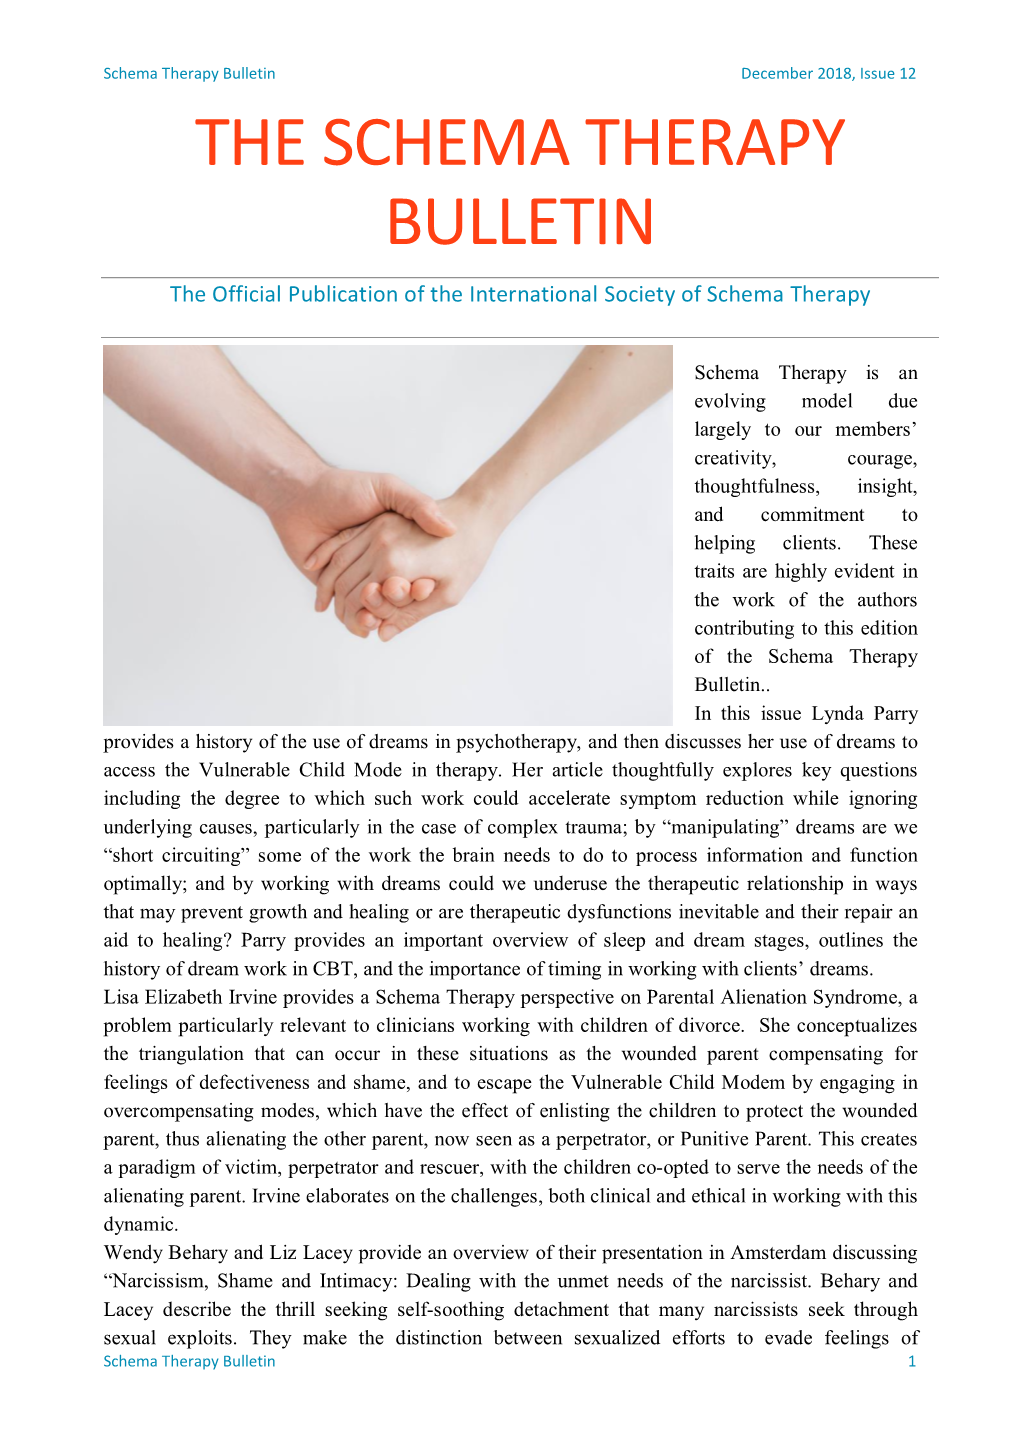 THE SCHEMA THERAPY BULLETIN the Official Publication of the International Society of Schema Therapy